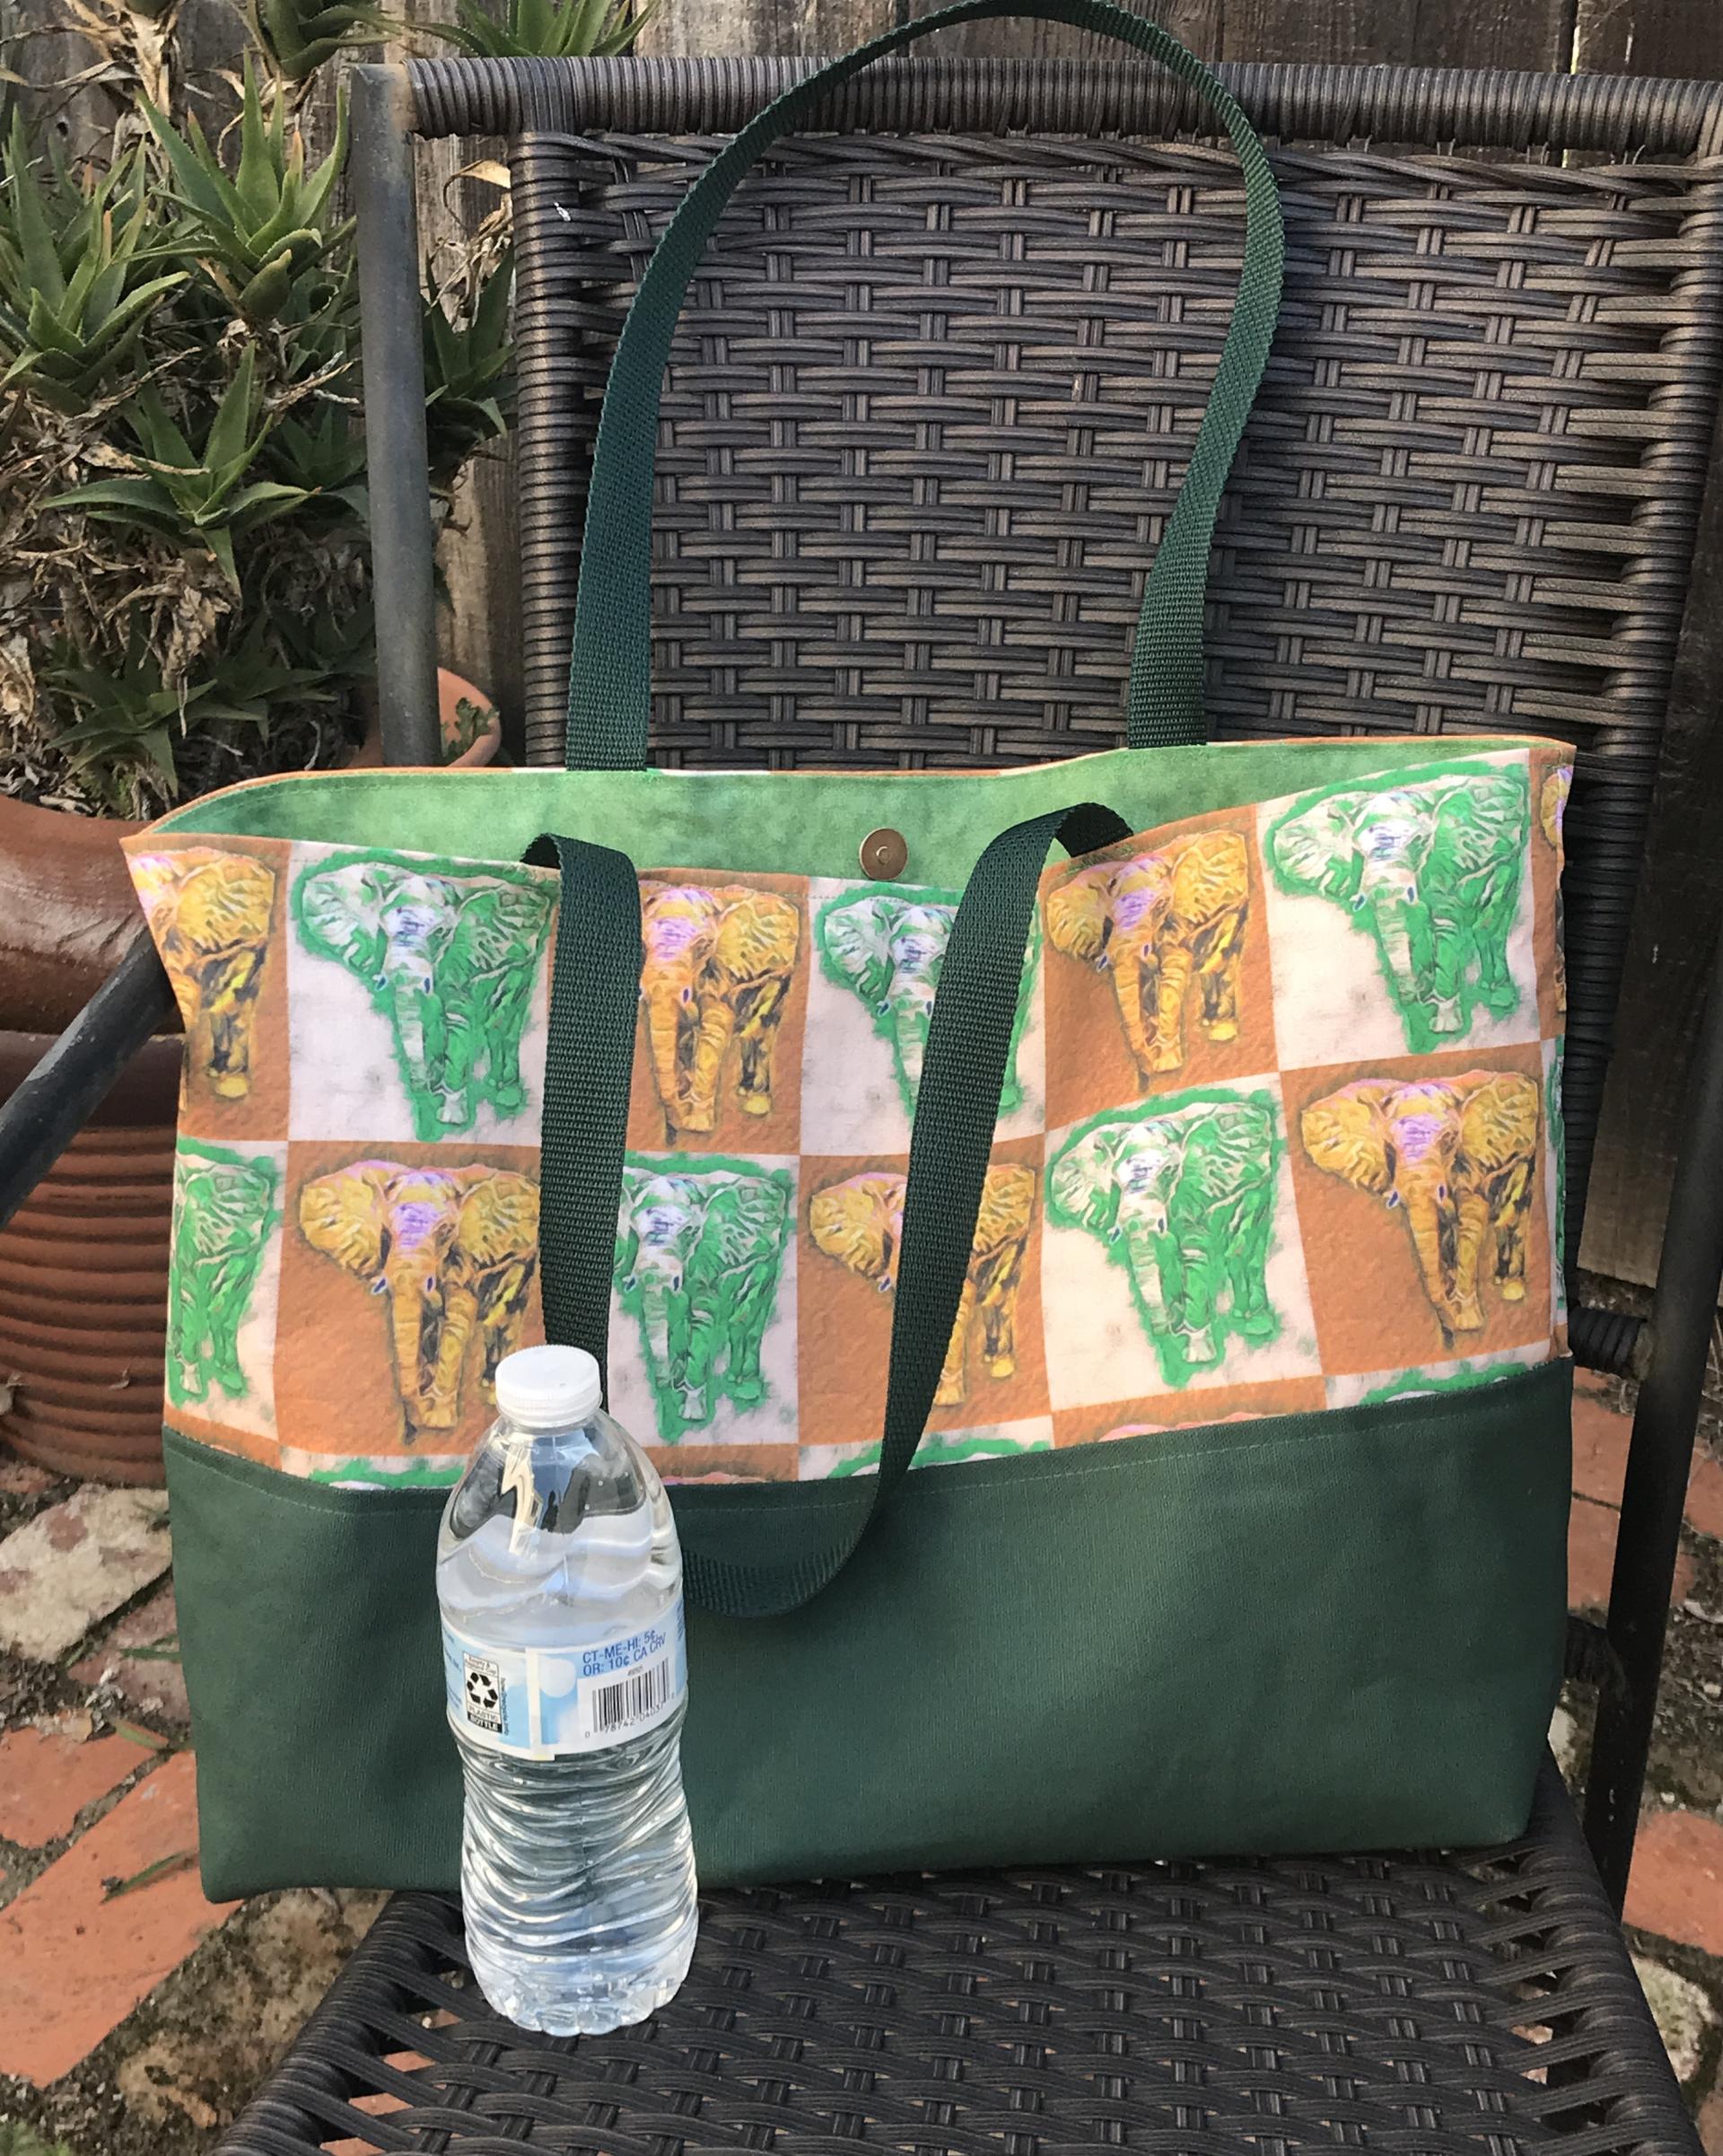 Tote bag, green & yellow elephants, water bottle  to show scale (not included)